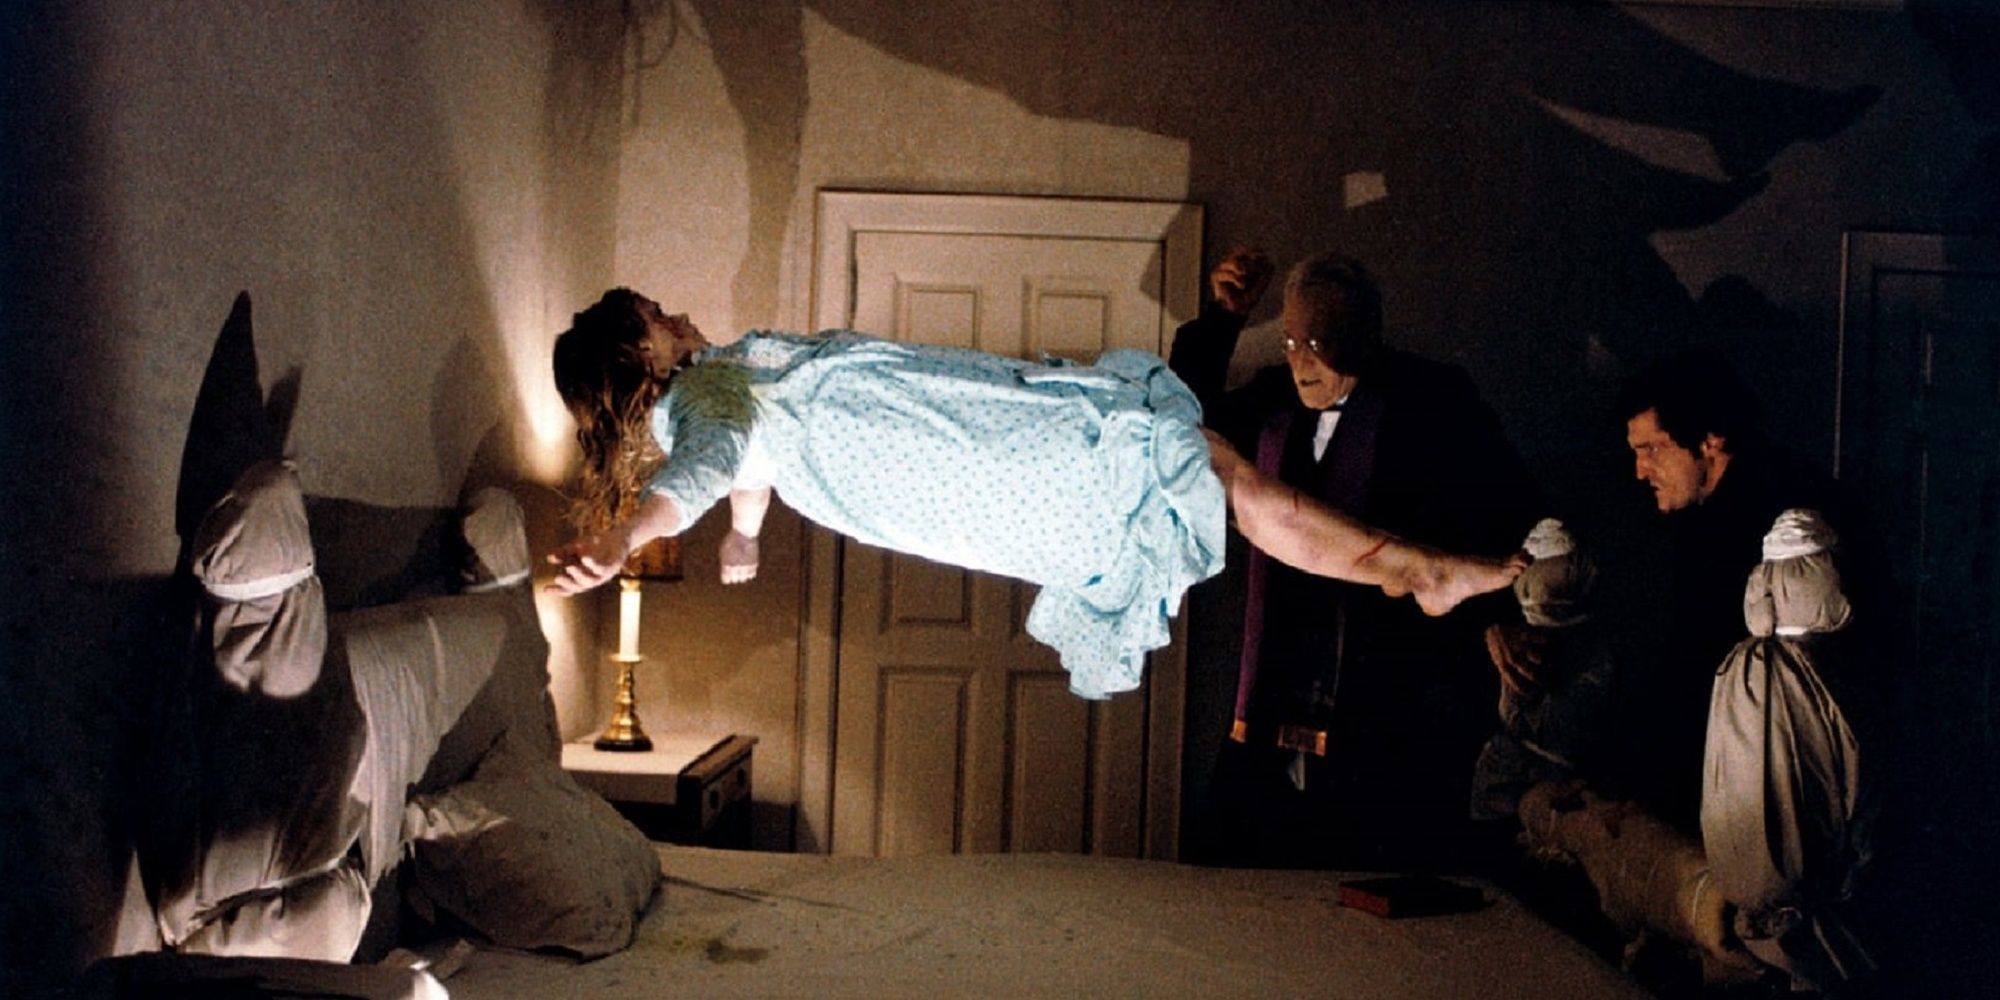 The Exorcist - Regan floating over bed while two priest watches